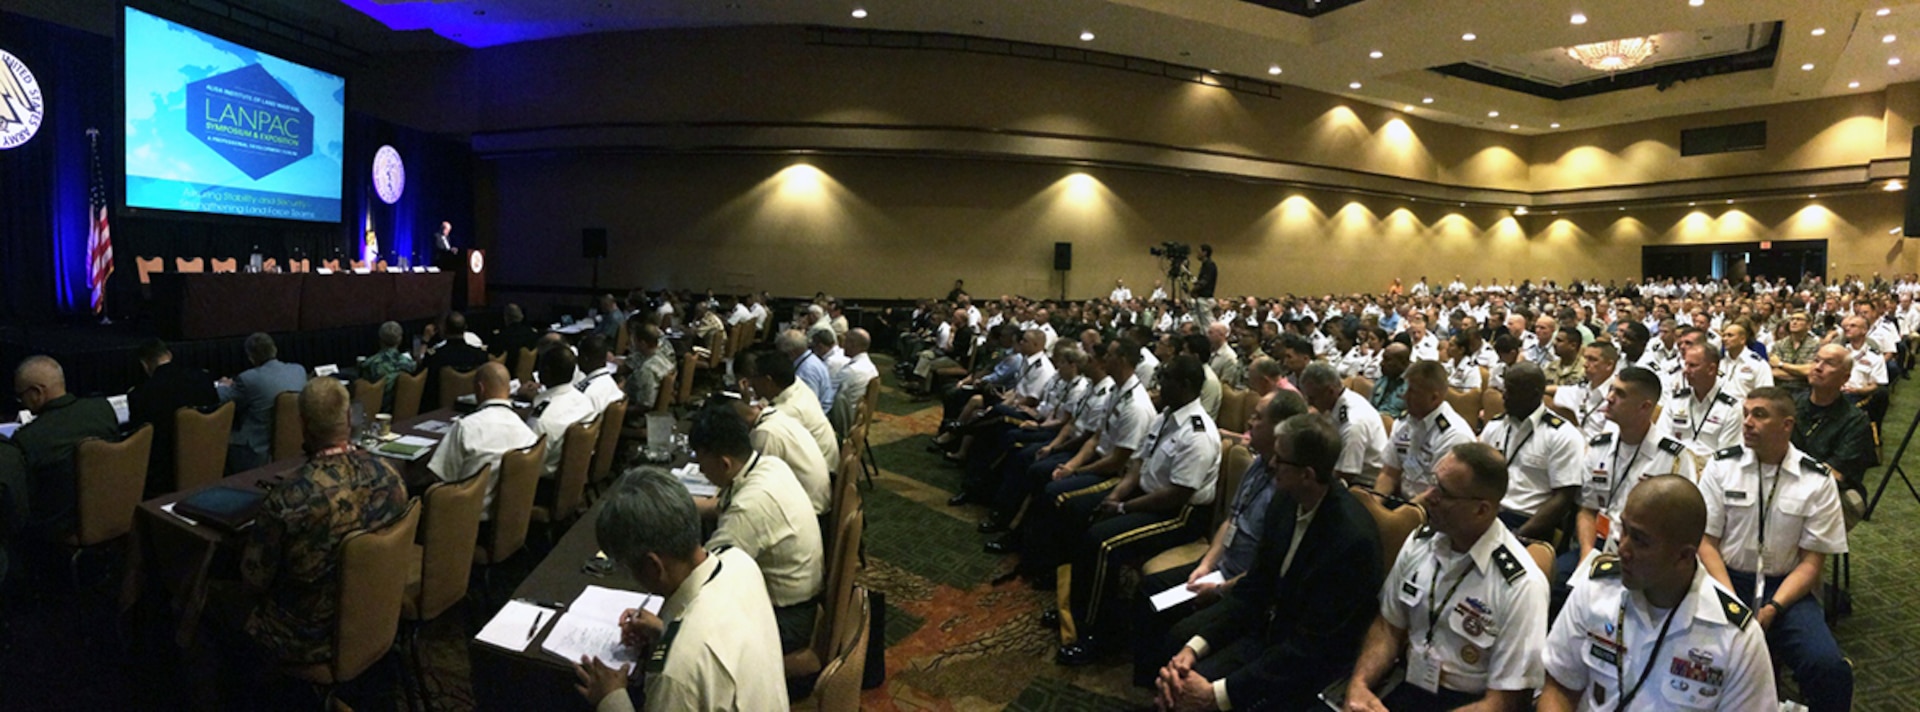 HONOLULU, Hawaii (May 24, 2016) - Representatives from more than 20 nations throughout the Indo-Asia-Pacific region, as well as service members from all four branches of the U.S. Department of Defense, gather at the Sheraton Waikiki to kick off the 4th annual land power in the Pacific (LANPAC) Symposium & Exposition. The three-day symposium will provide an opportunity for multiple land forces commanders from the U.S. Army Pacific; U.S. Marine Corps Forces, Pacific; and Special Operations Command Pacific, alongside joint and regional partners, to discuss and showcase the critical role of Pacific land forces which extend over an area that that spans nearly half the world's surface area and holds half the world's population. This year's theme is "Assuring Stability and Security - Strengthening Land Force Teams". 